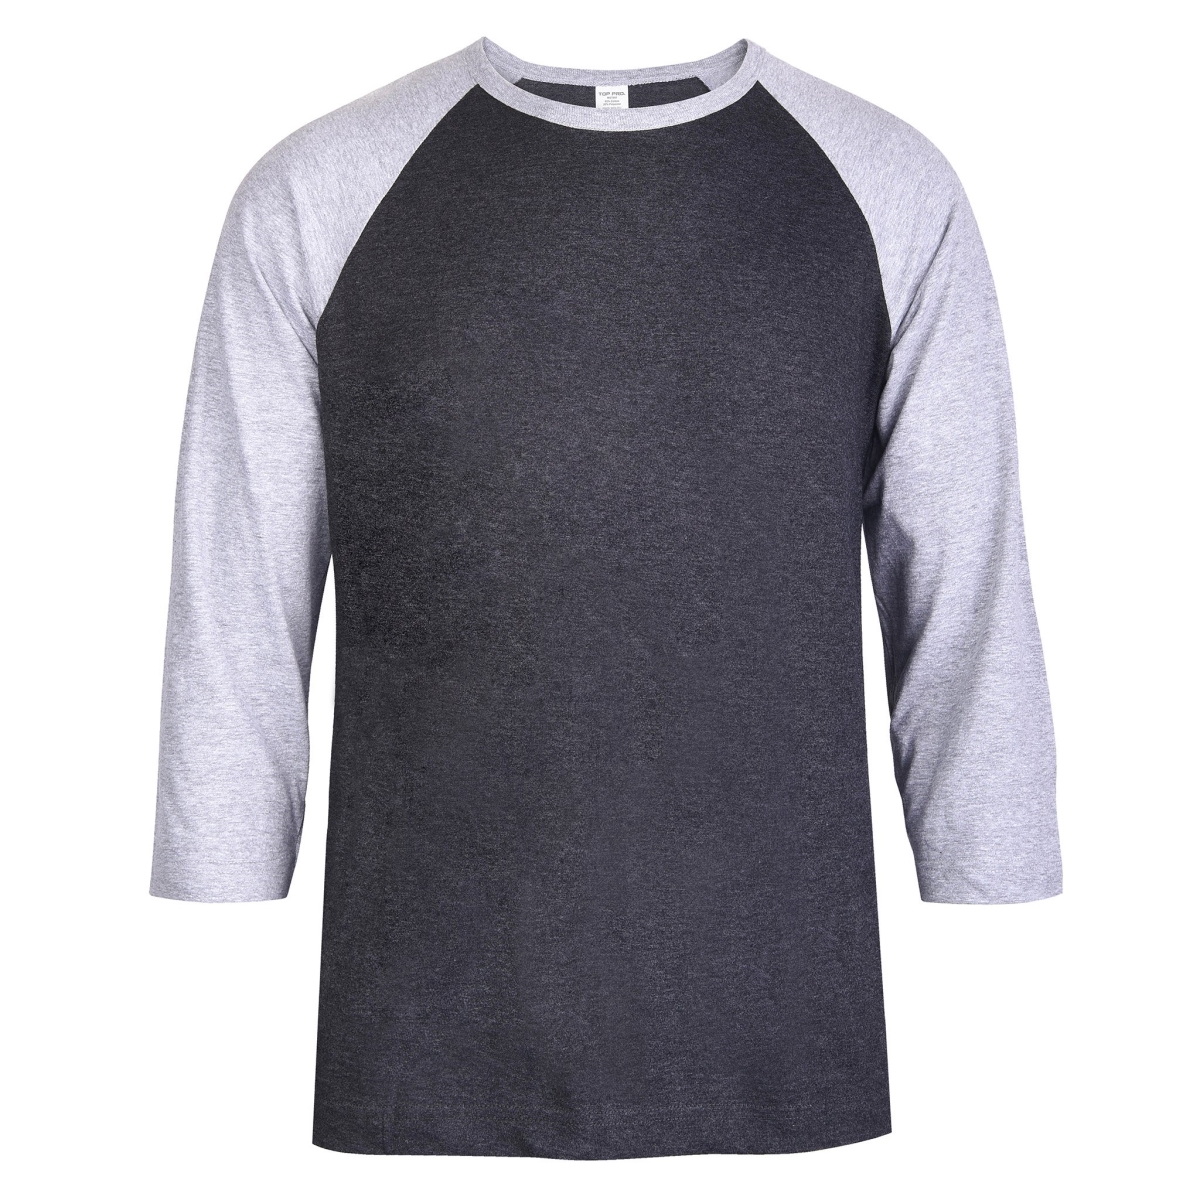 Picture of 247 Frenzy 247-MBT001 HCG-SM Mens Essentials Top Pro 0.75 Sleeve Raglan Baseball T-Shirt&#44; Heather Charcoal Gray - Small